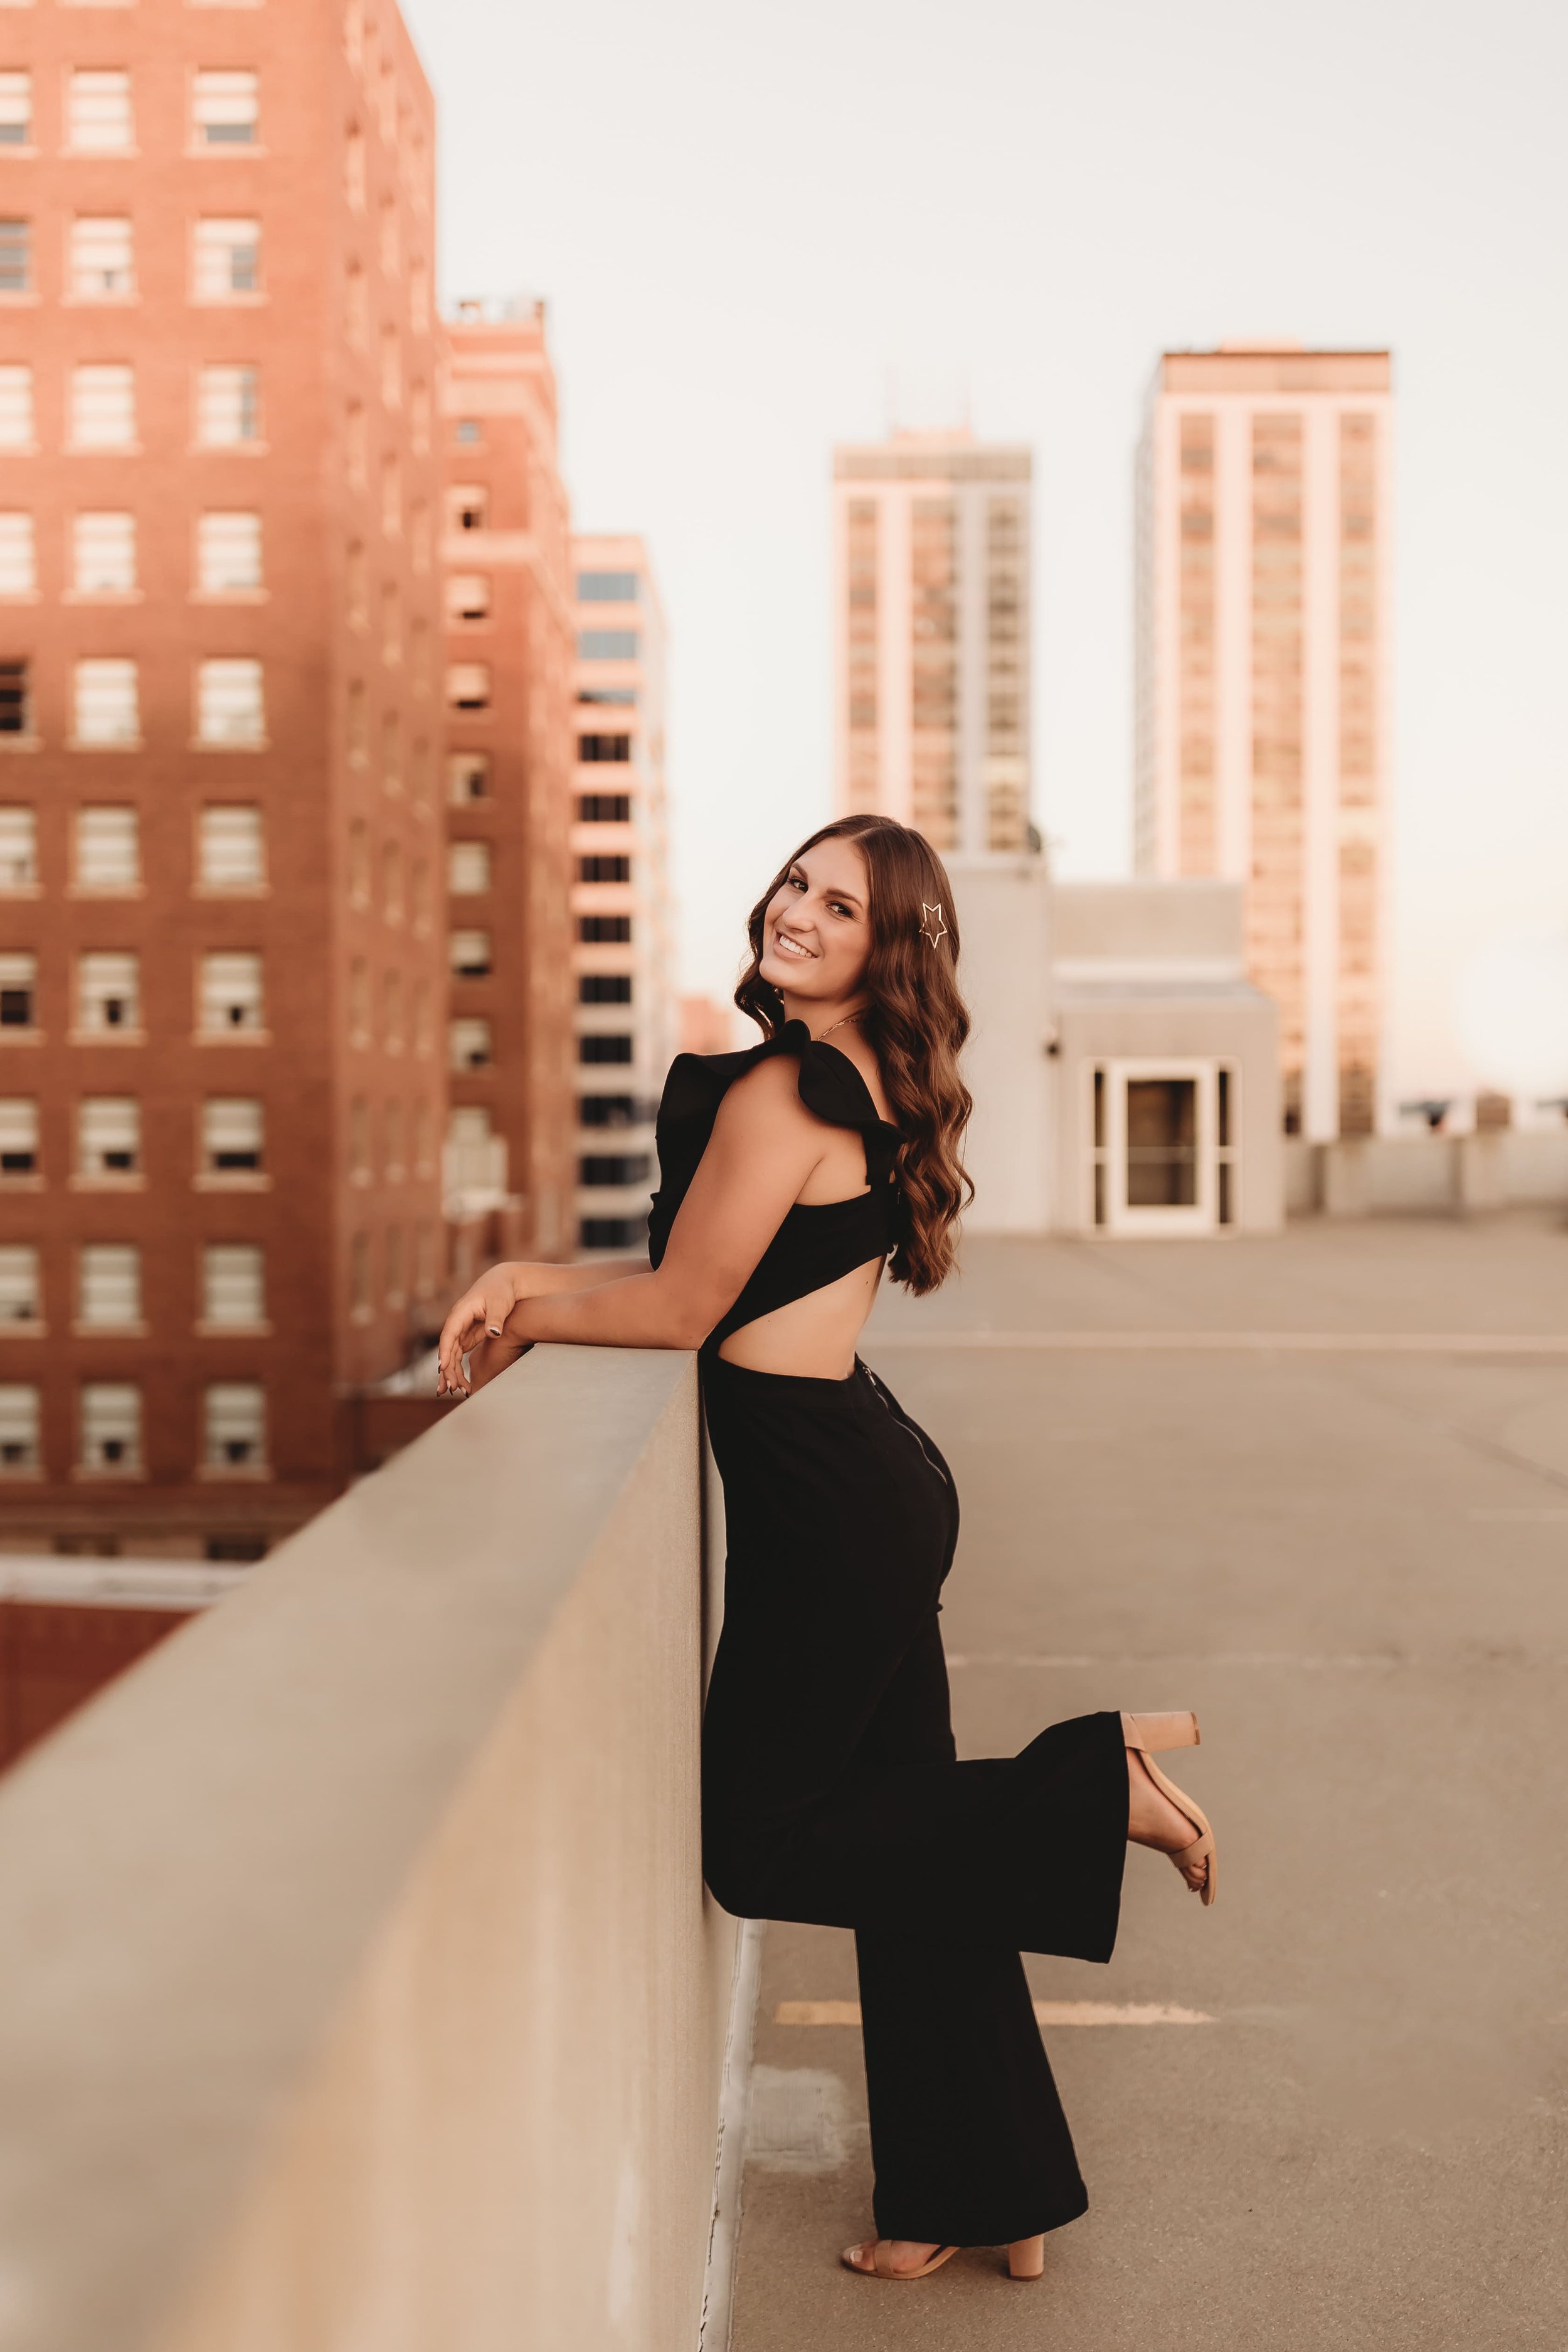  Senior stands near the edge of a downtown peoria rooftop as she smiles over her shoulder with one leg kicked up behind her posing for senior photographers near me 